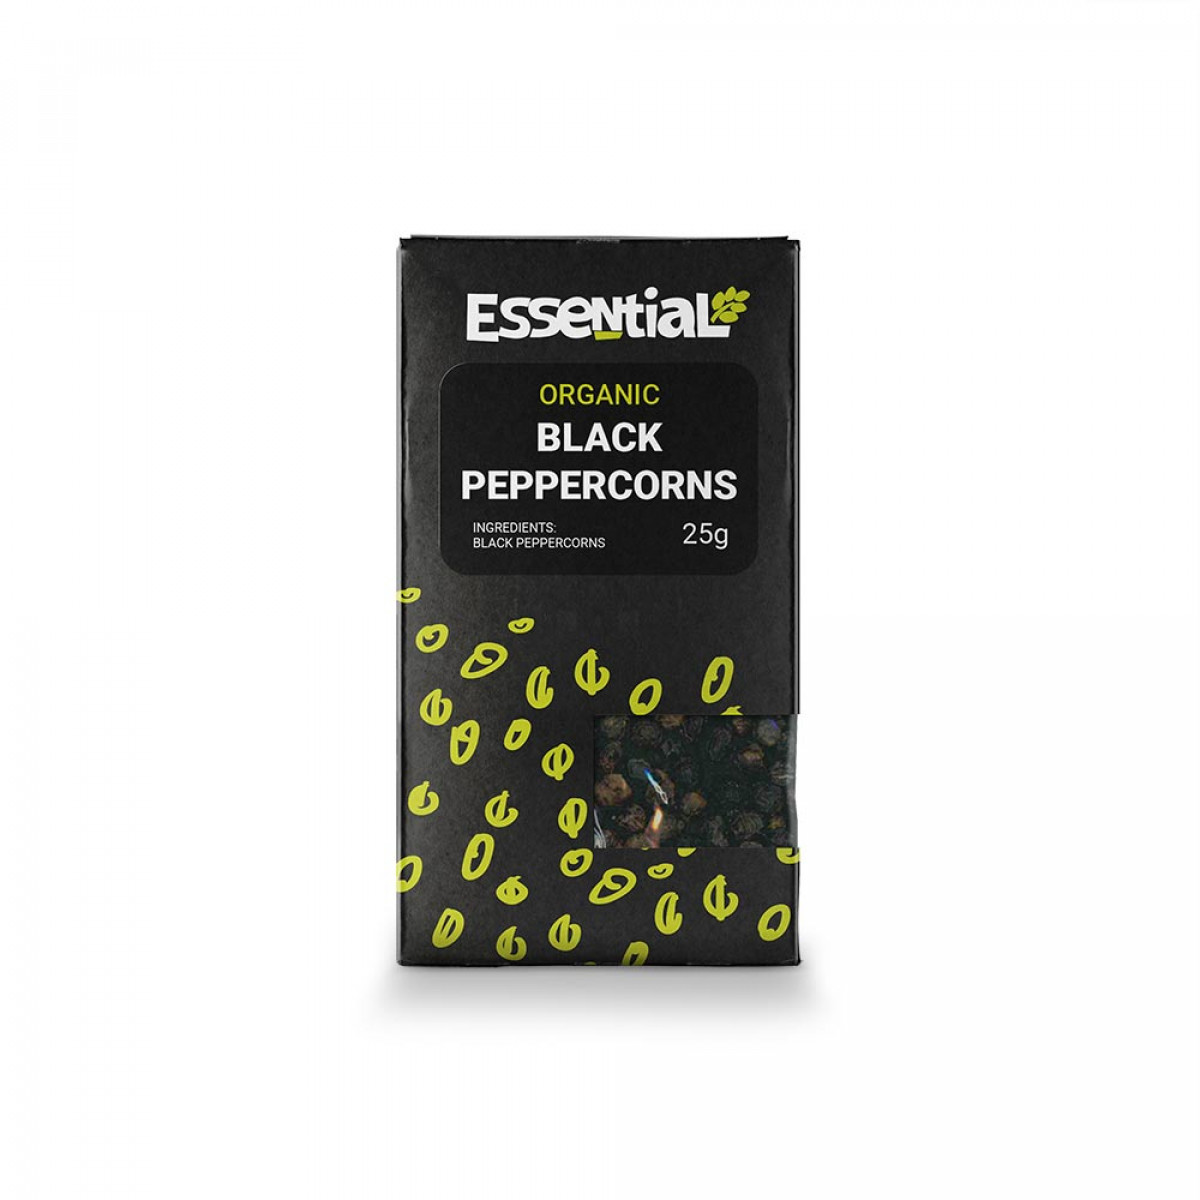 Product picture for Black Peppercorns